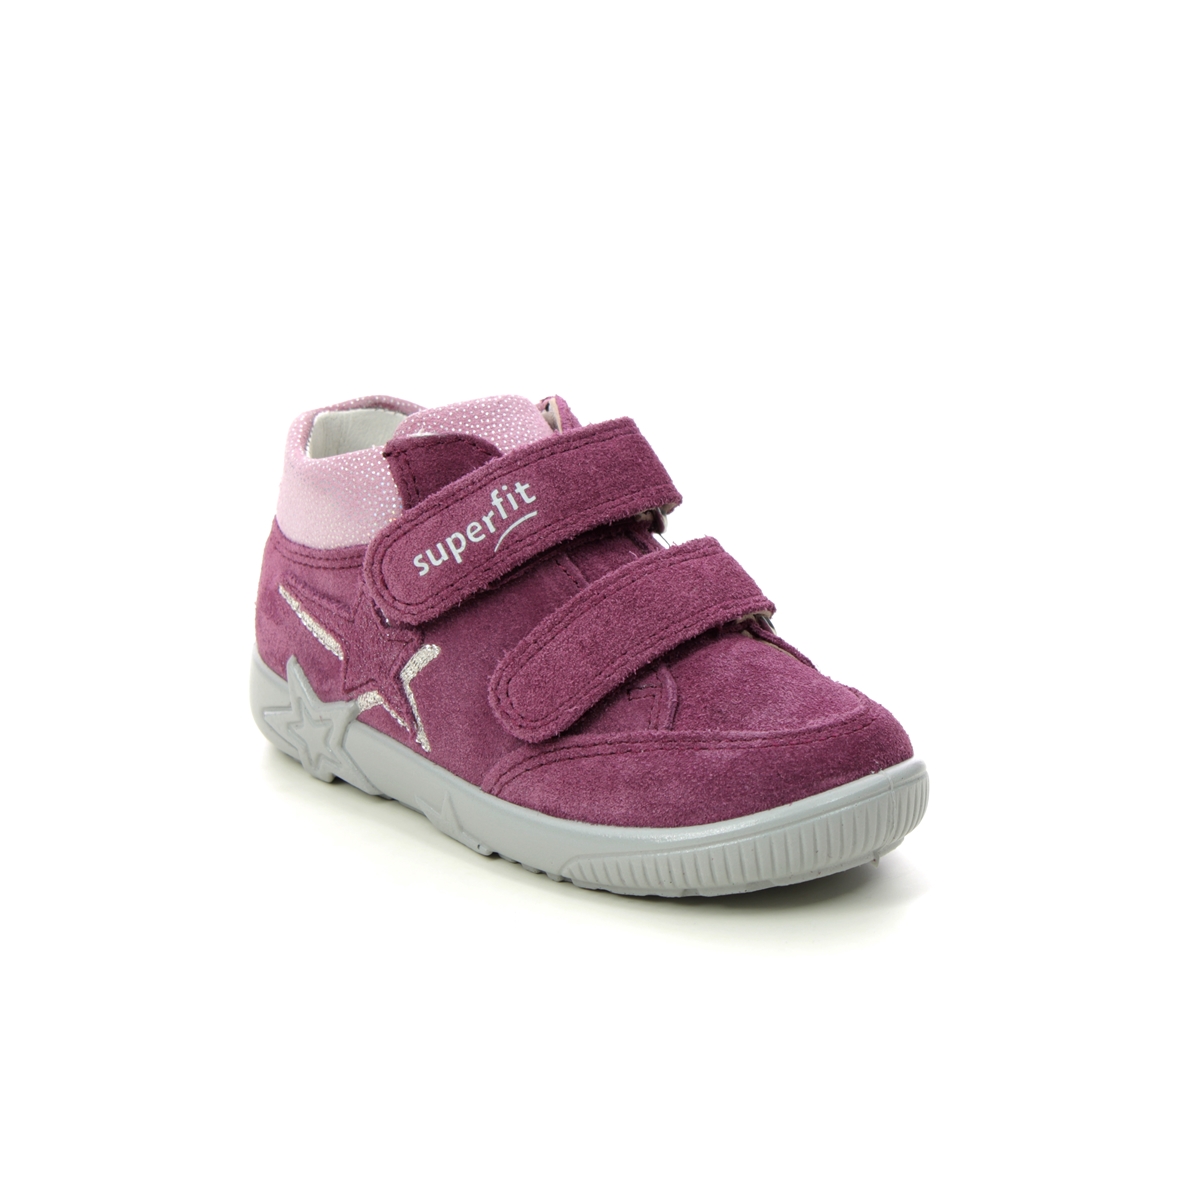 Superfit Starlight Ht 2V Pink Suede Kids First Shoes 1006443-5510 In Size 24 In Plain Pink Suede